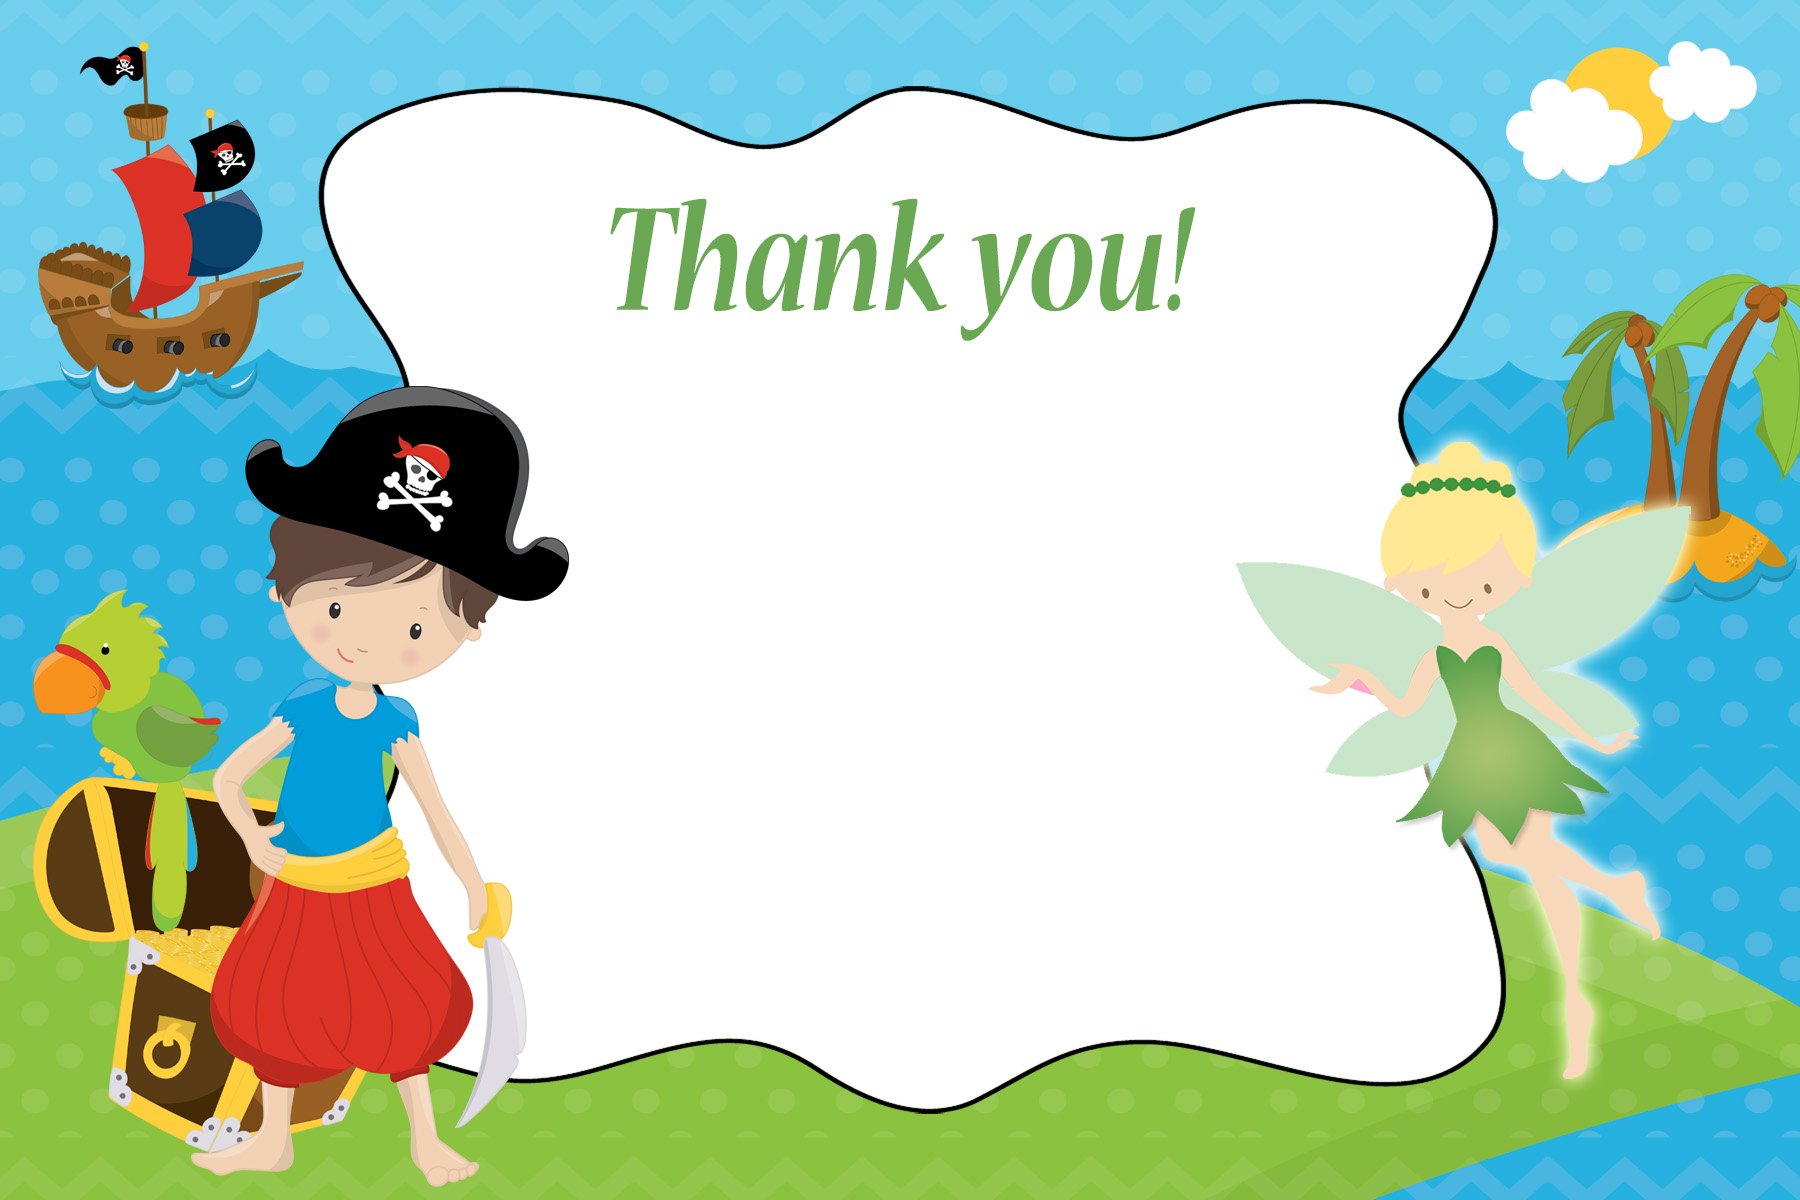 30 Thank You Cards Green Blue Polka Dots Pirate Fairy Design Baby Shower Birthday Twins Siblings Party + 30 White Envelopes